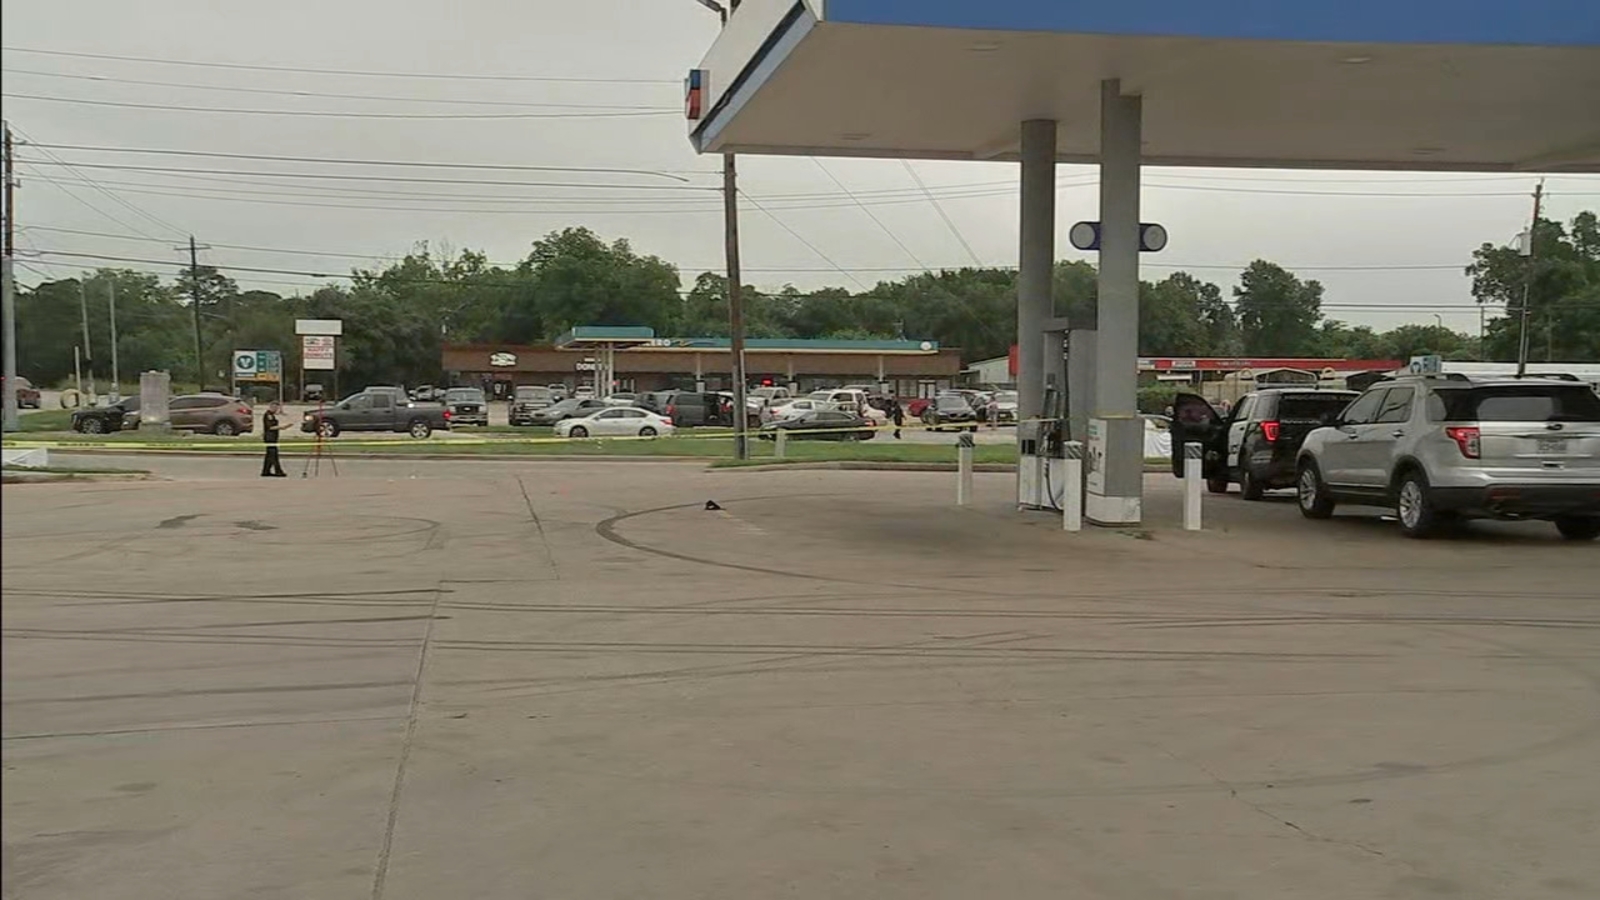 Almeda Genoa crime: Man dies after being pinned underneath car following crash in SE Houston gas station parking lot, HPD says [Video]